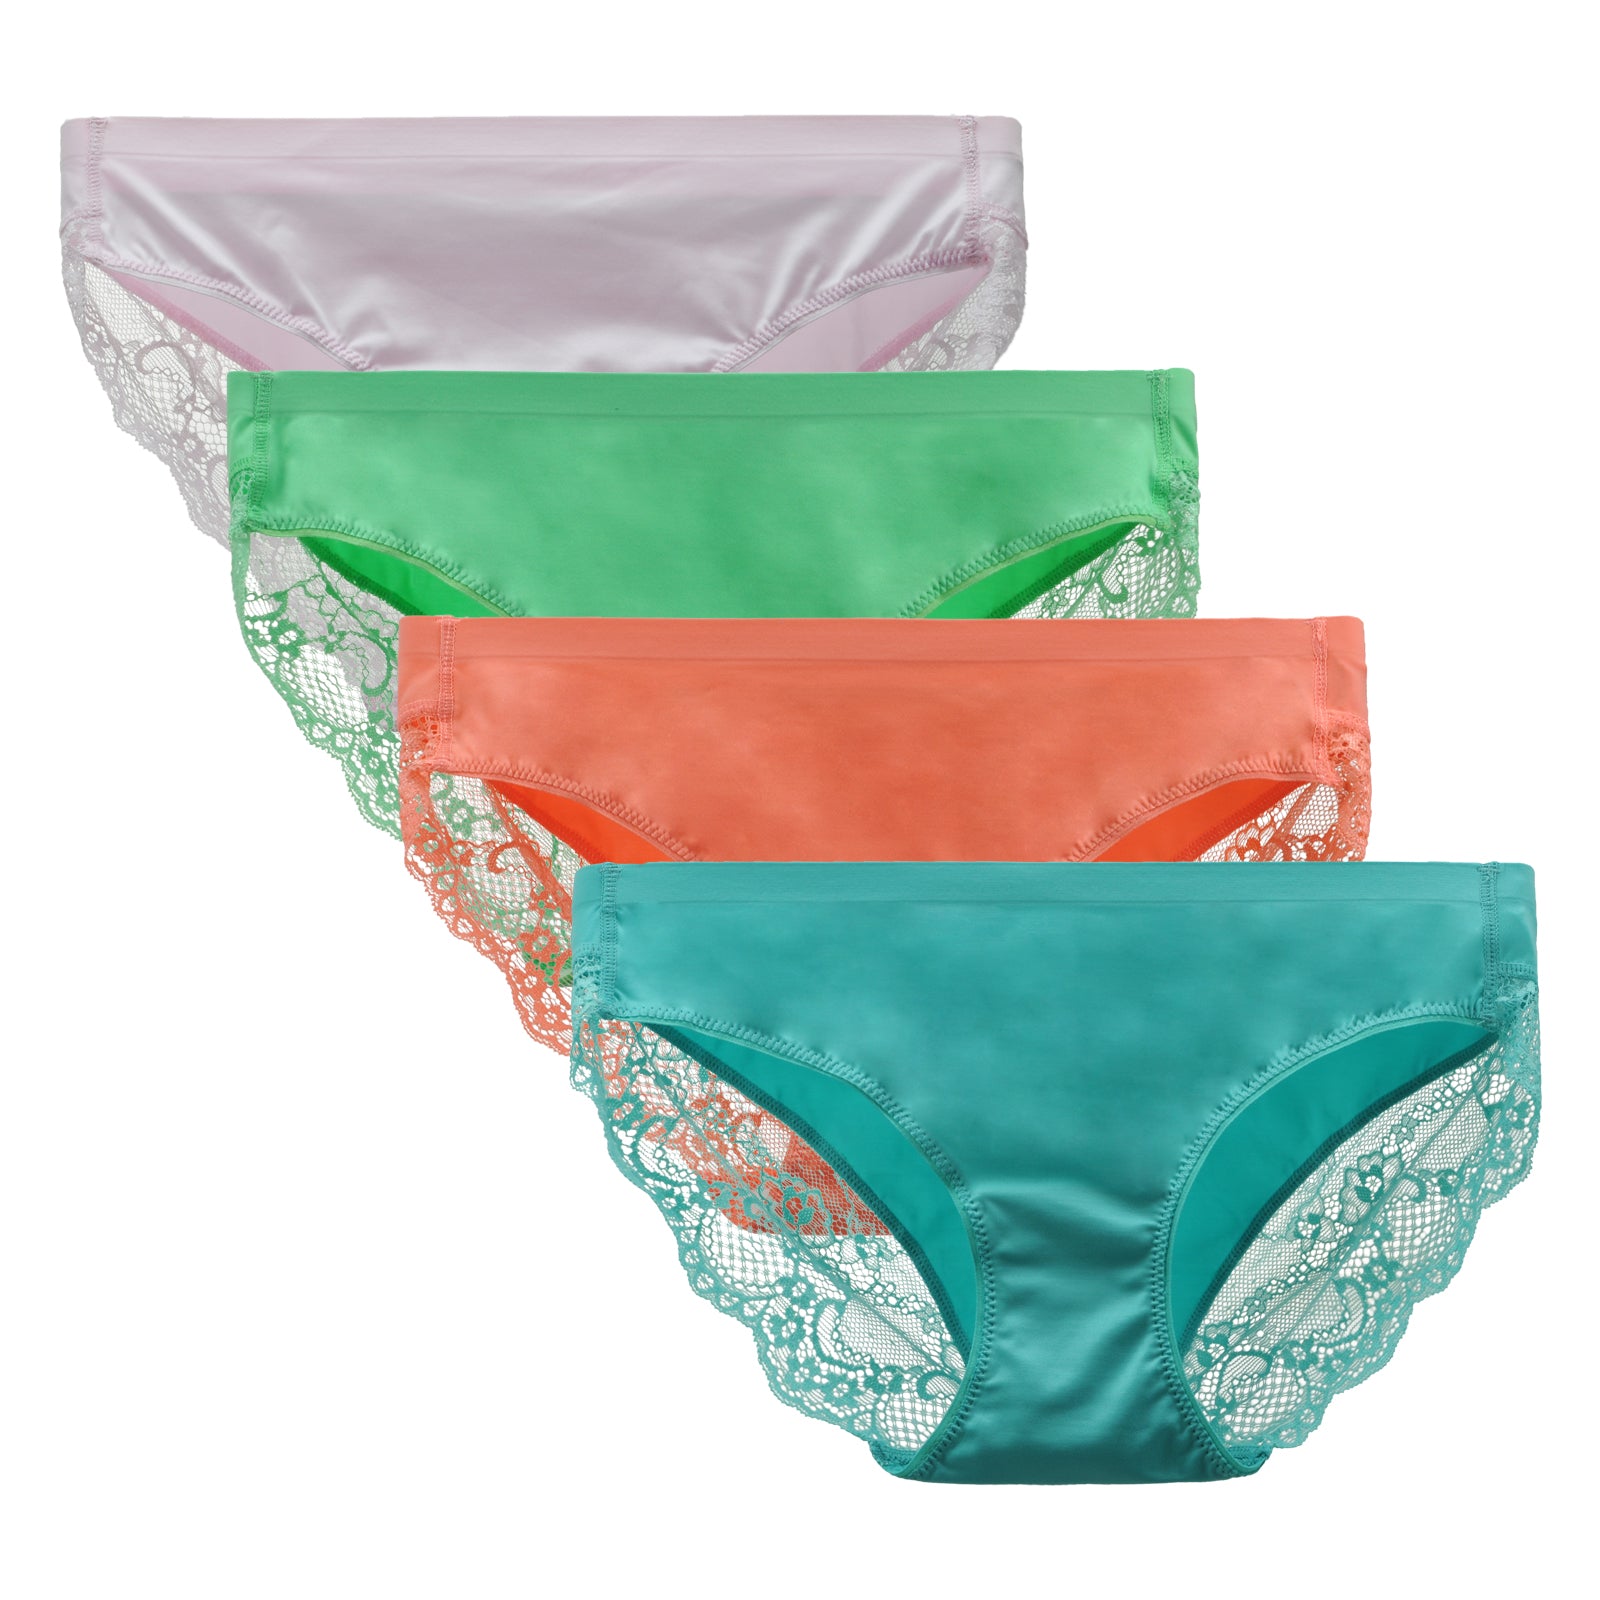 LIQQY Women's 4 Pack Mid Rise Cotton Lace Back Full Coverage Brief Panty  Underwear